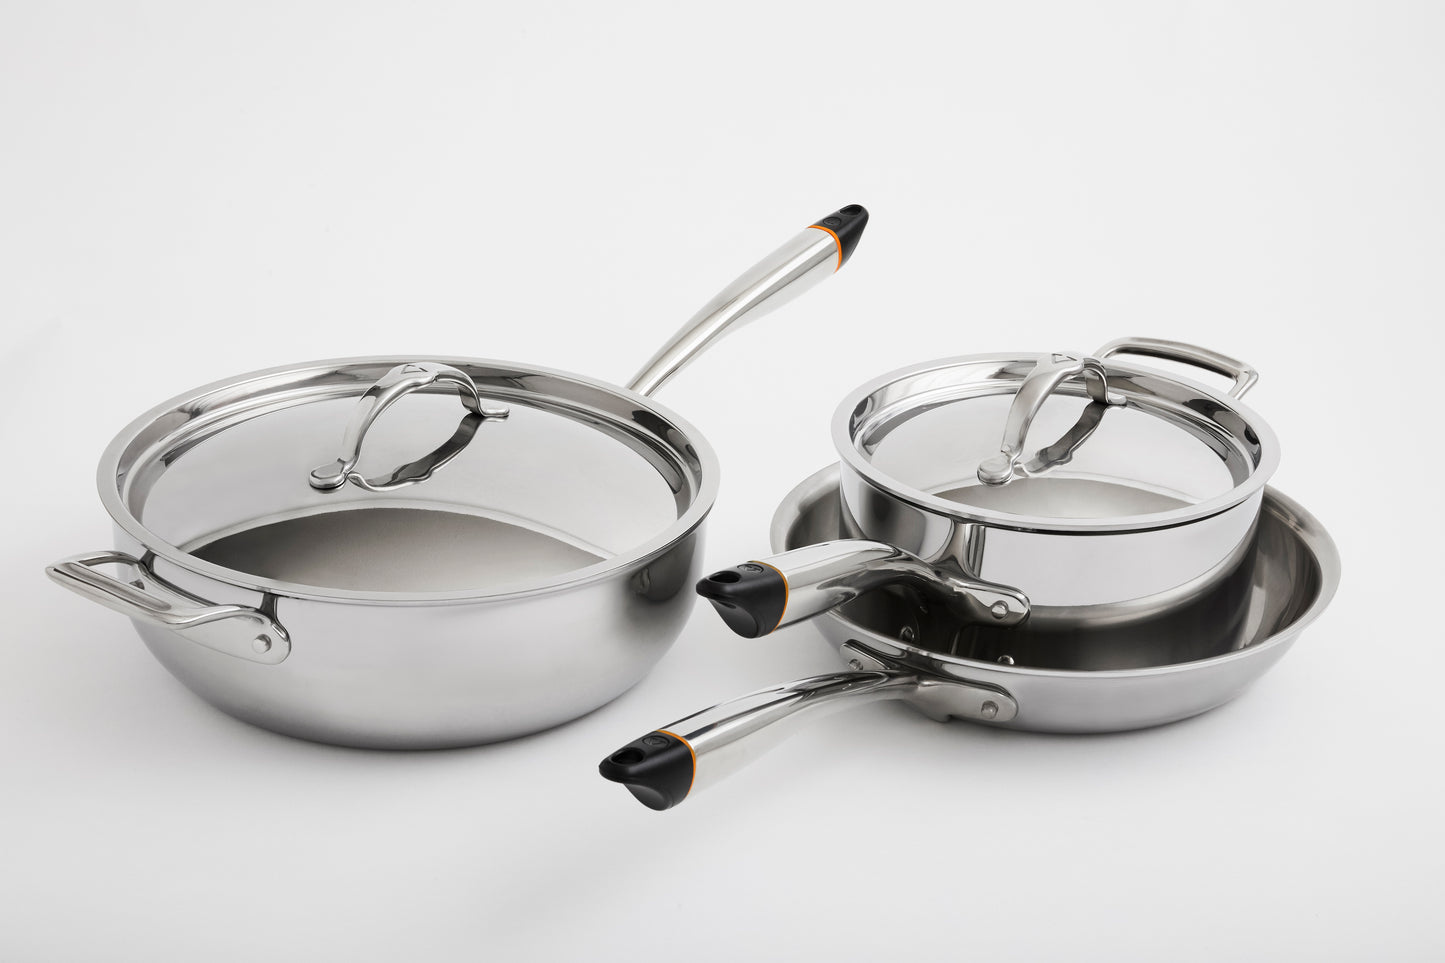 Hestan-SmartChef Collection - Precision Temperature Stainless Steel 5-Piece Cookware Set